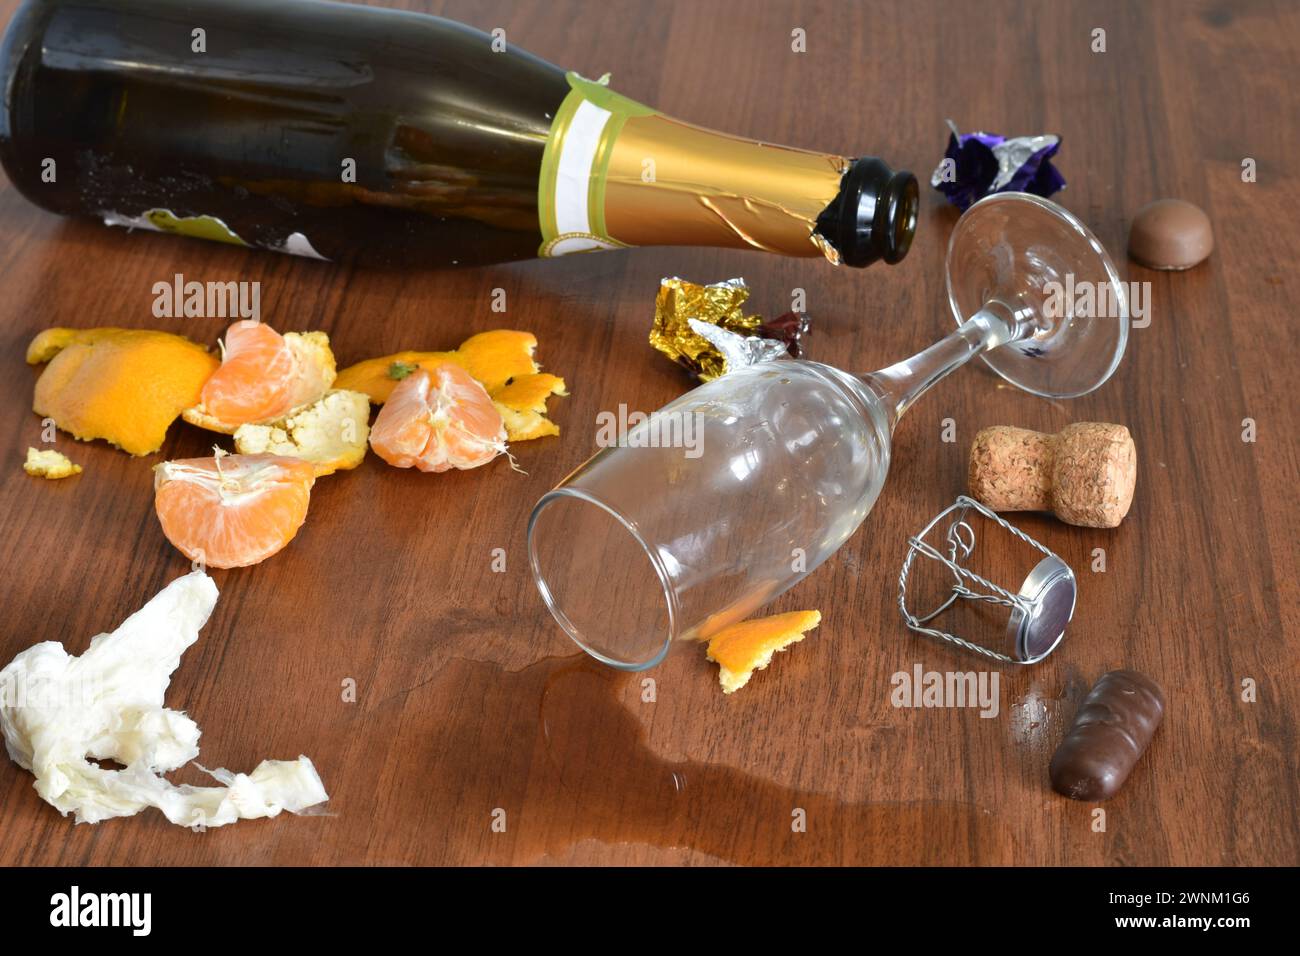 After a fun holiday, a bottle, a glass with spilled wine and a peel from tangerines remained on the table. Stock Photo